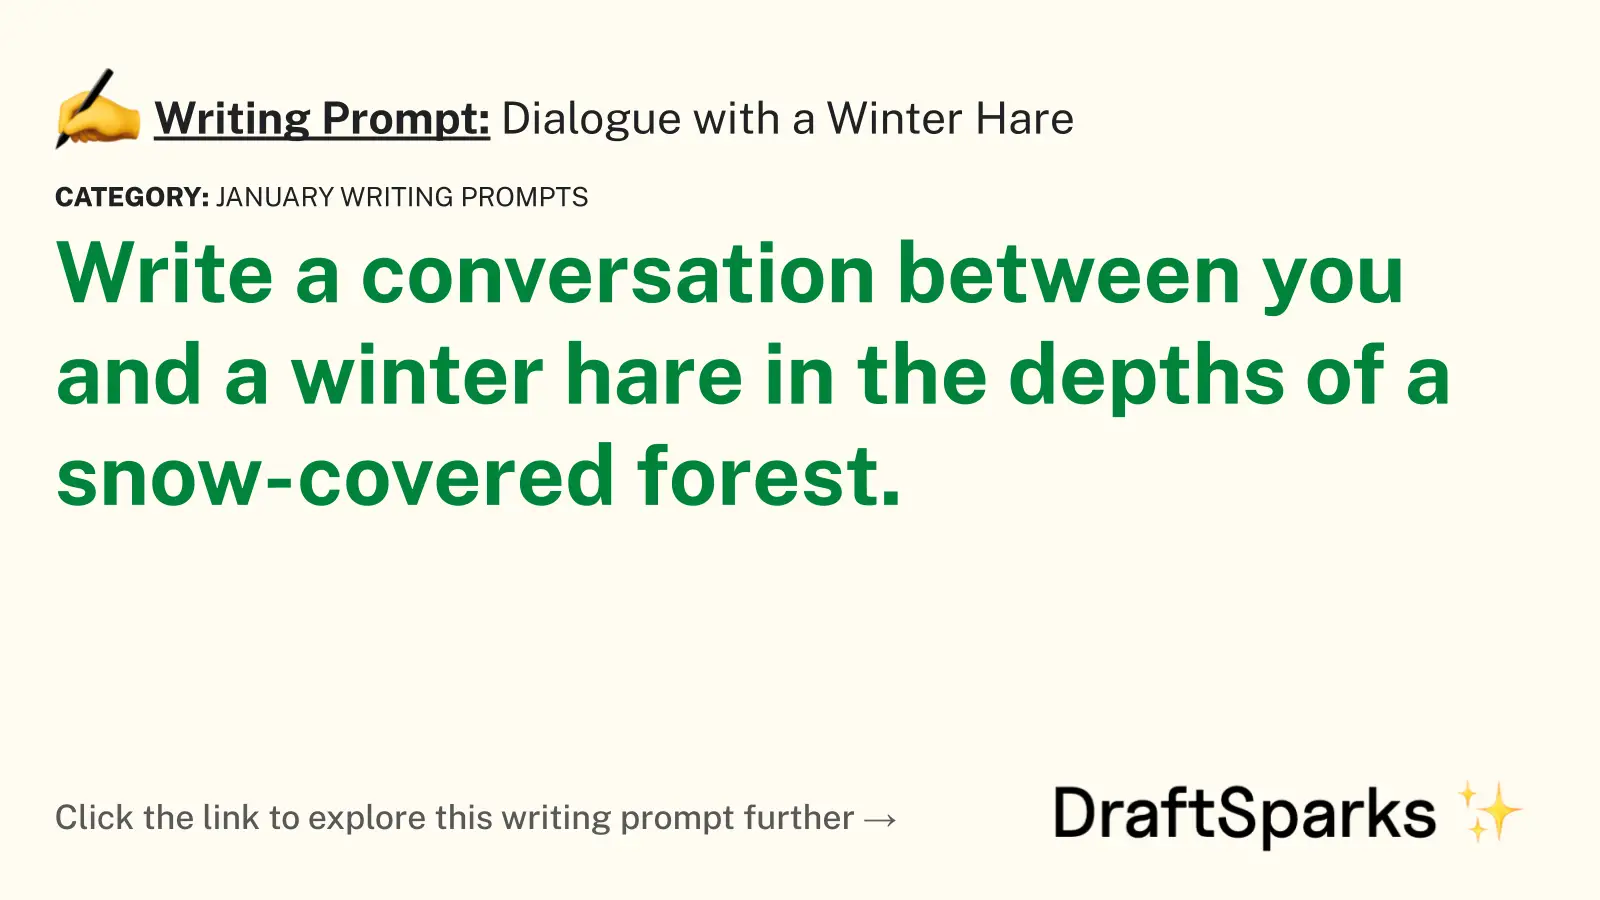 Dialogue with a Winter Hare